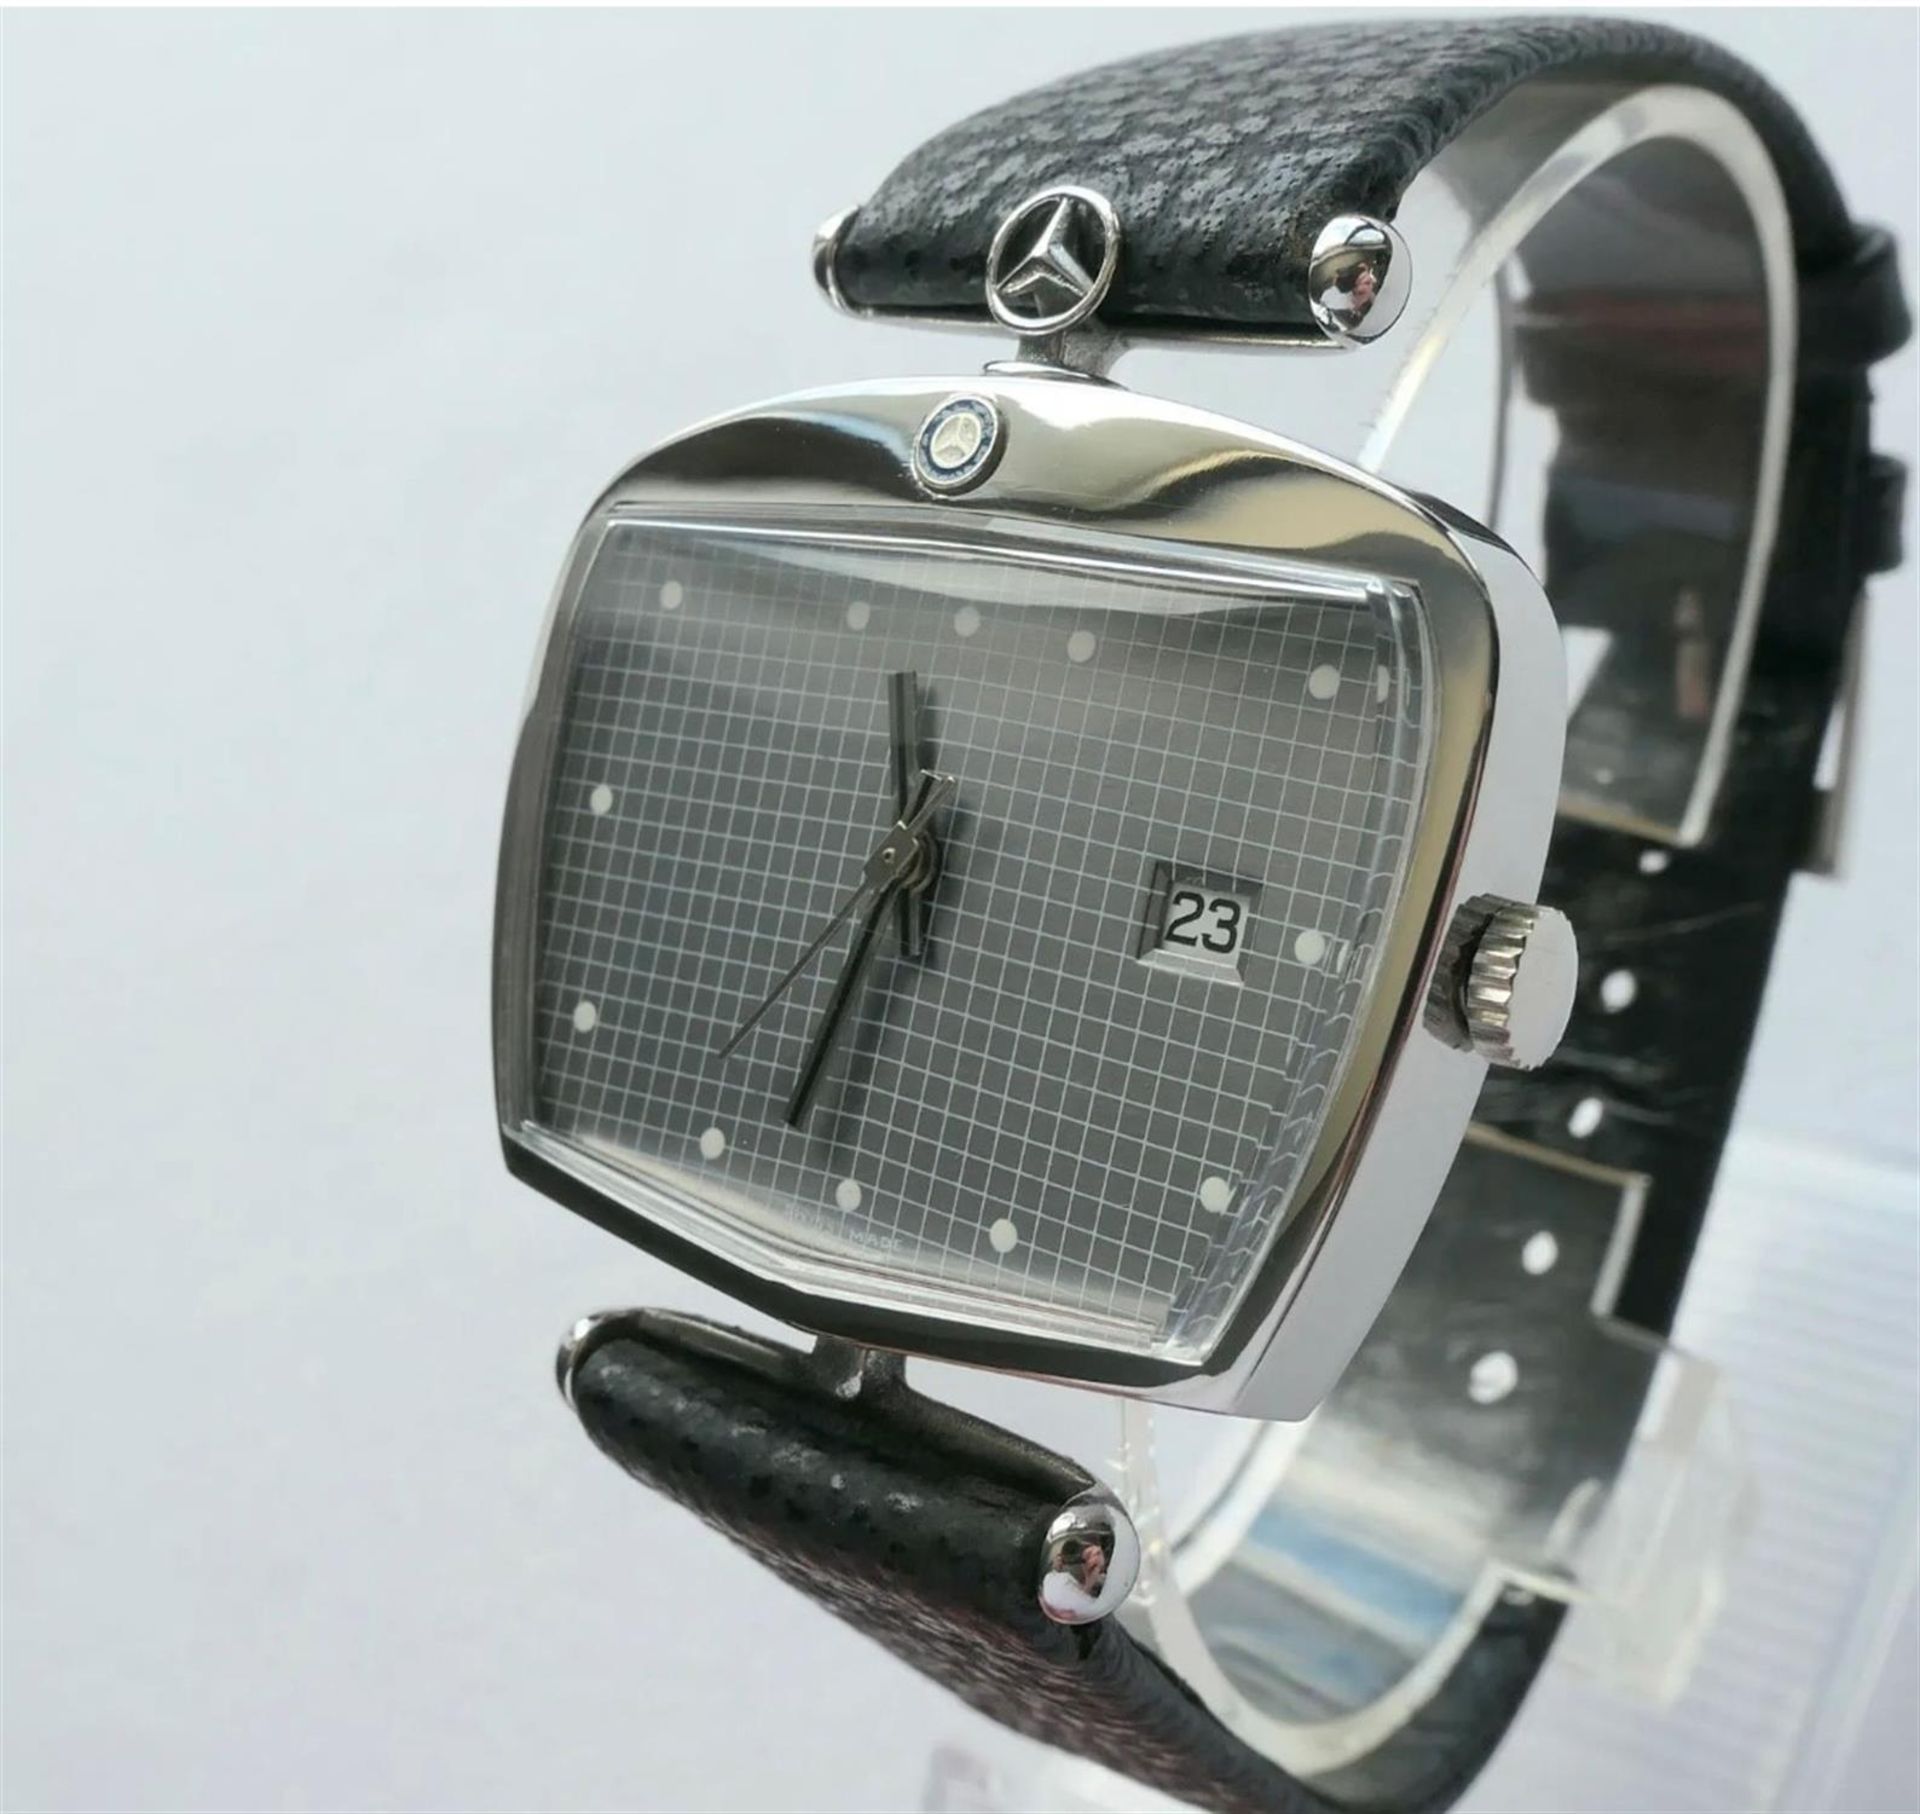 A Rare Mercedes-Benz 'Grille-Head' New Old Stock Wristwatch Evocative of the Famous German Marque - Image 7 of 10